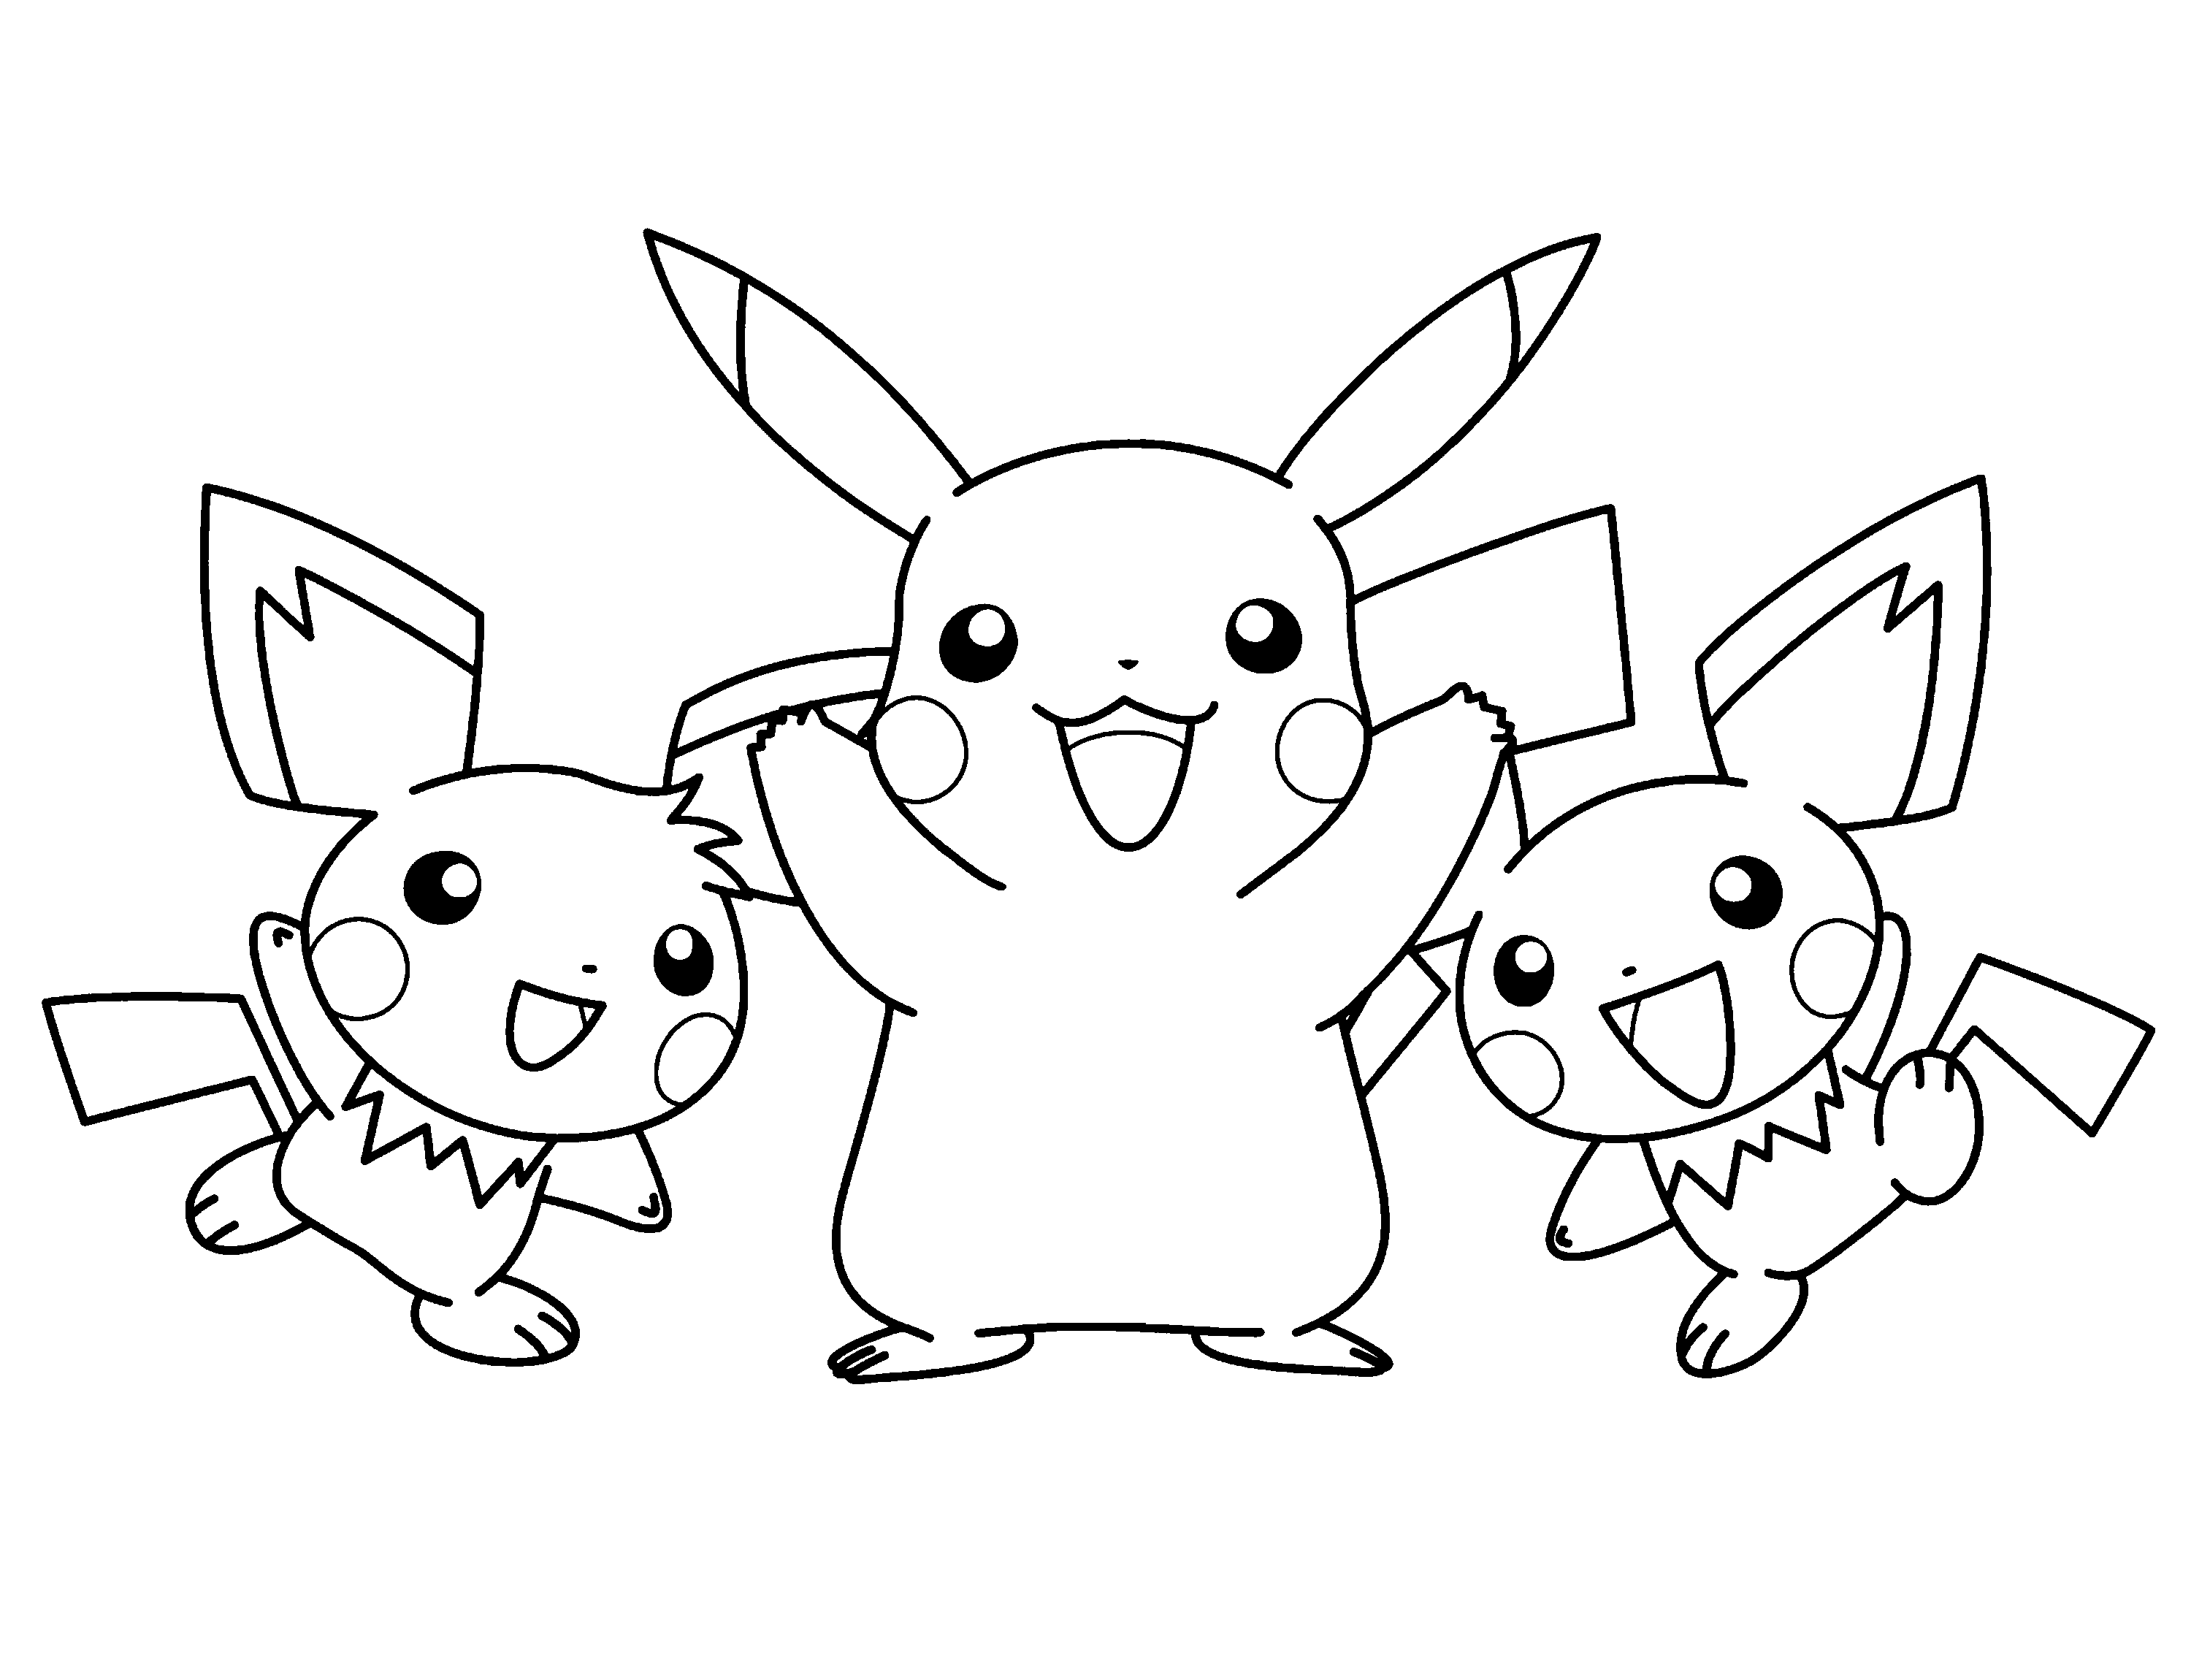 Print A Lot Of Those Pokemon Coloring Sheets And Then Create A Vibrant Cover Pokemon